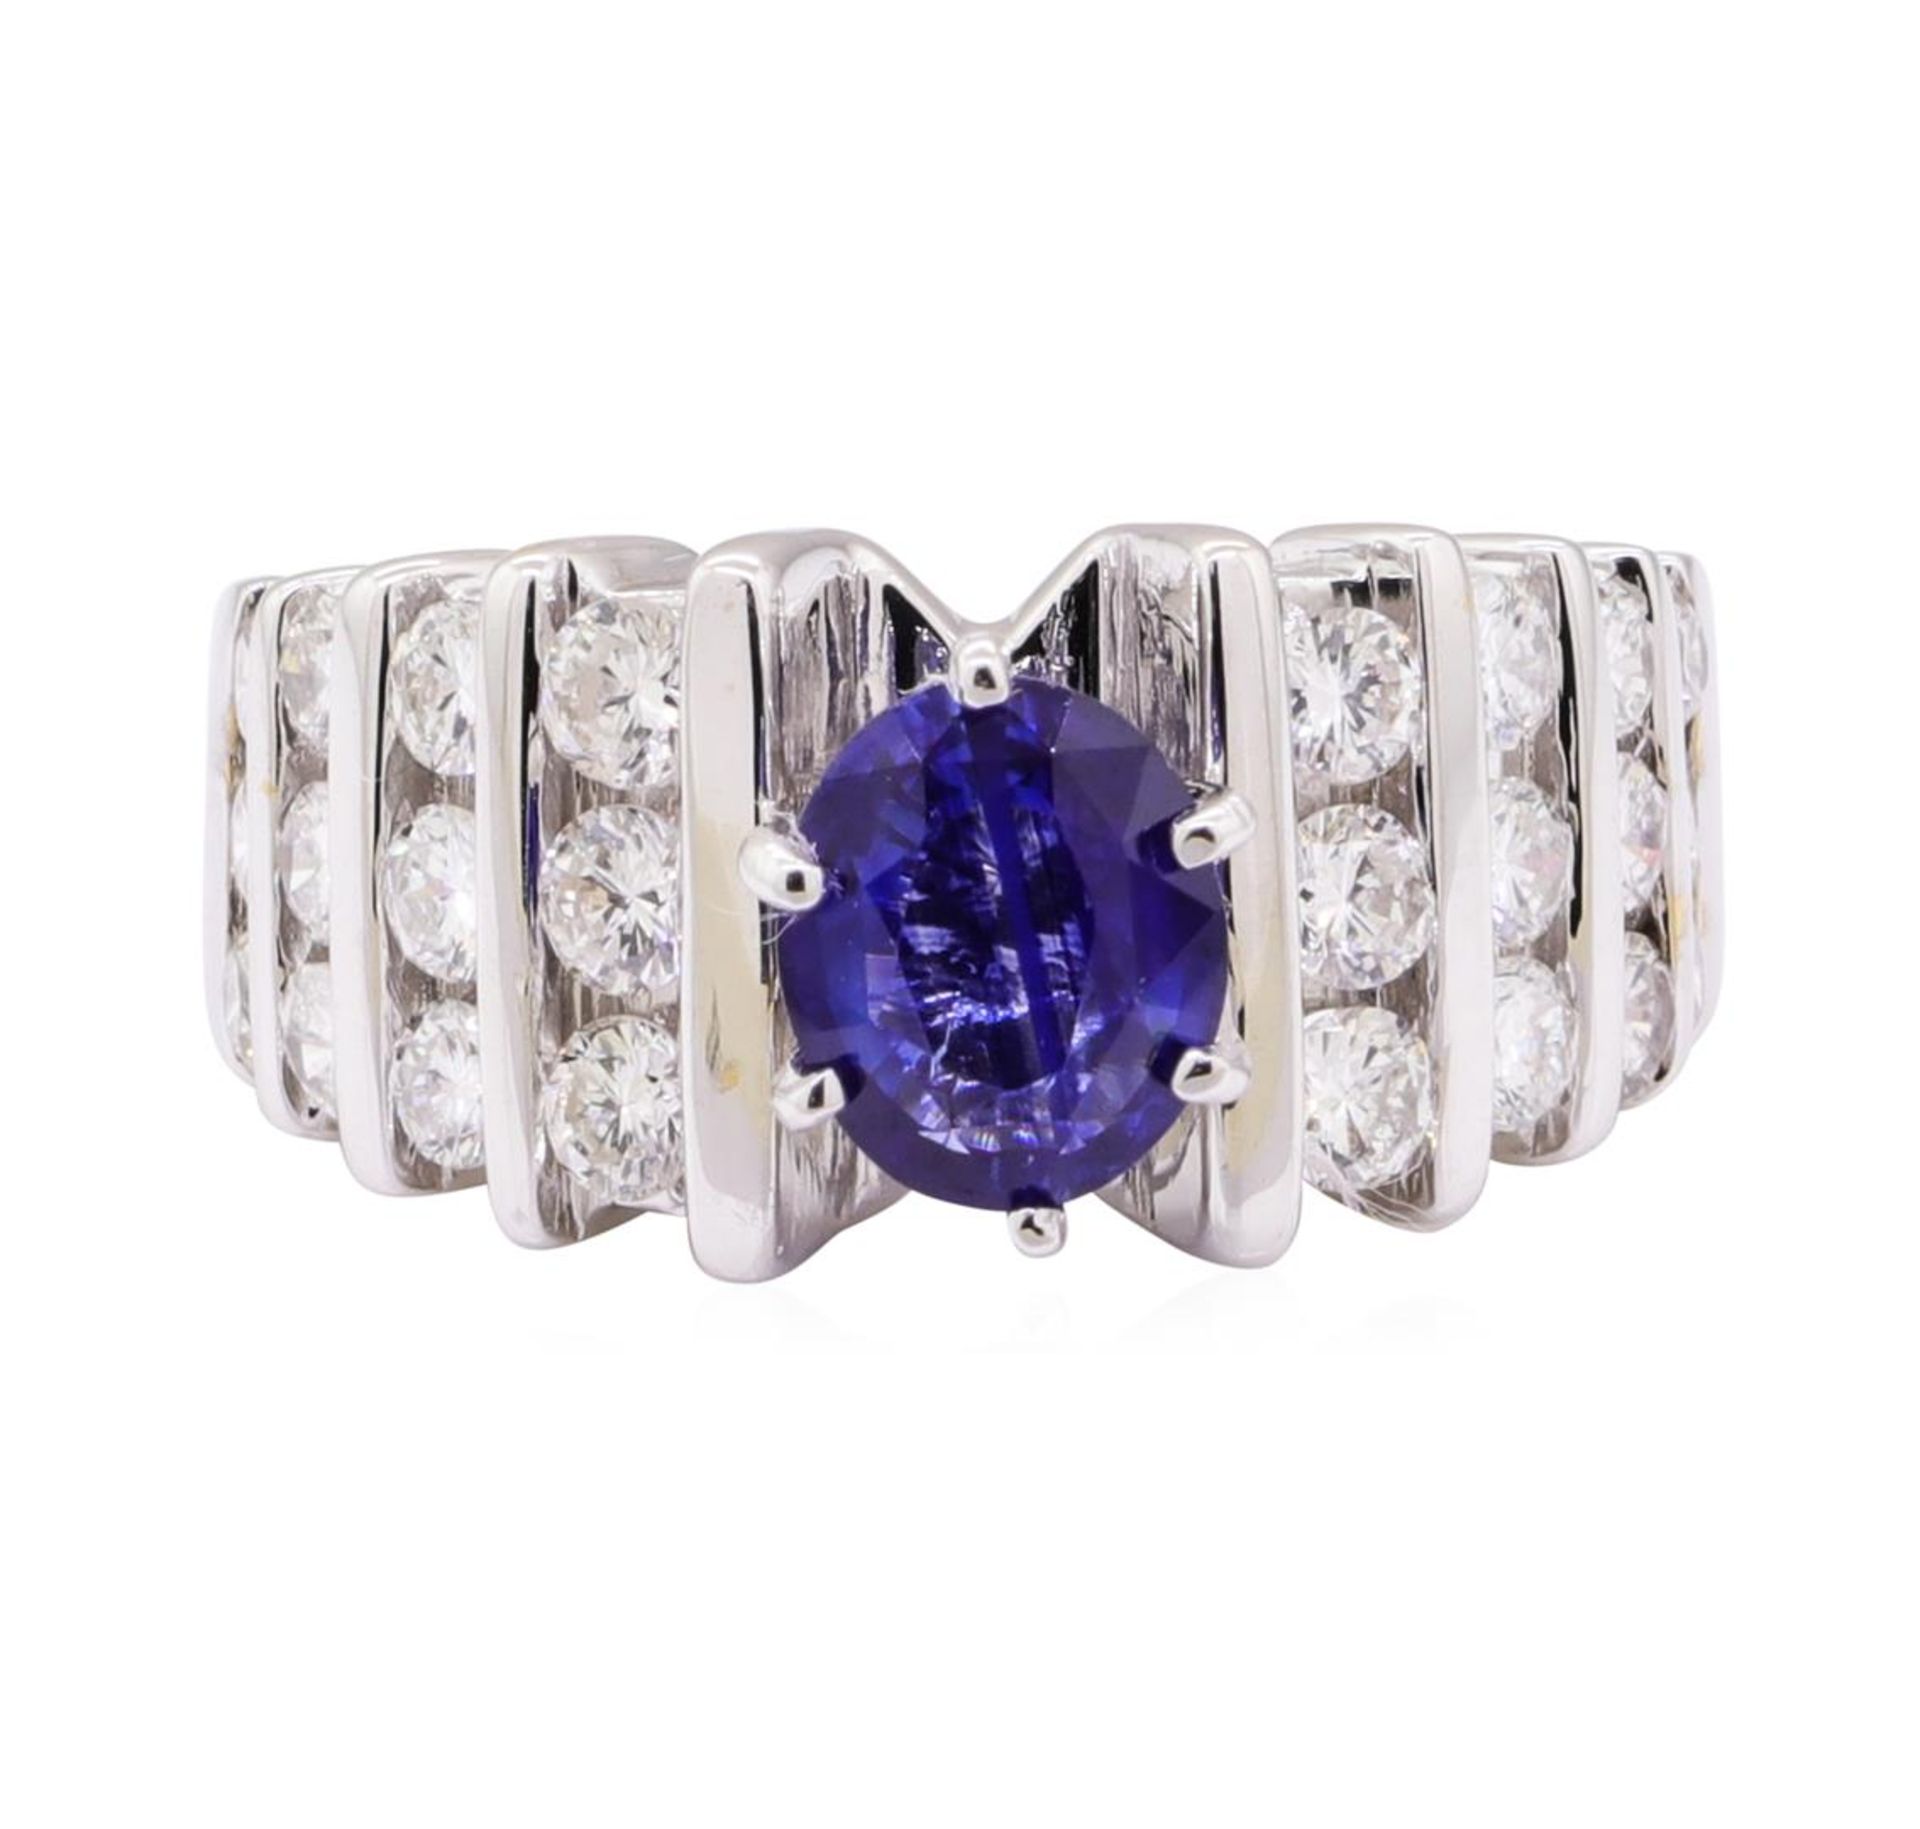 2.56 ctw Blue Sapphire And Diamond Ring - 14KT White Gold - Image 2 of 5